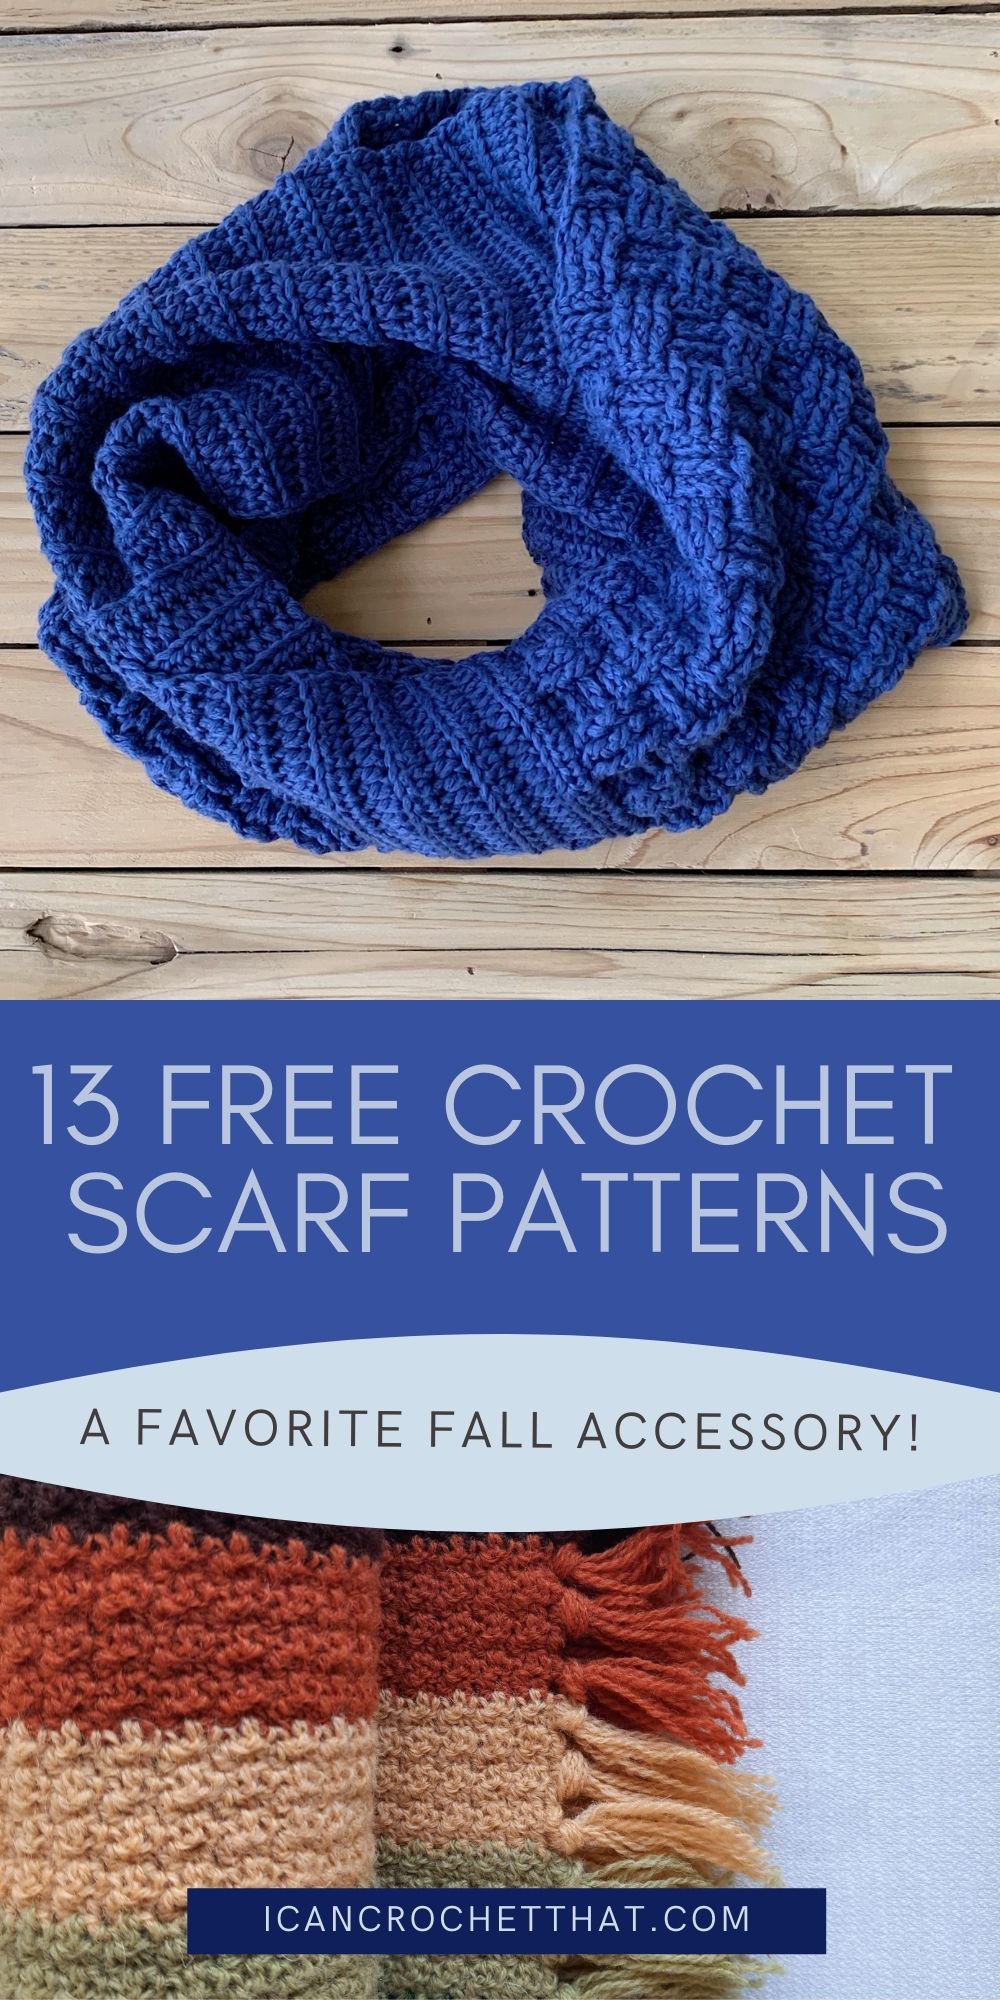 13 Free Crochet Scarf Patterns | The Best Fall Accessory!